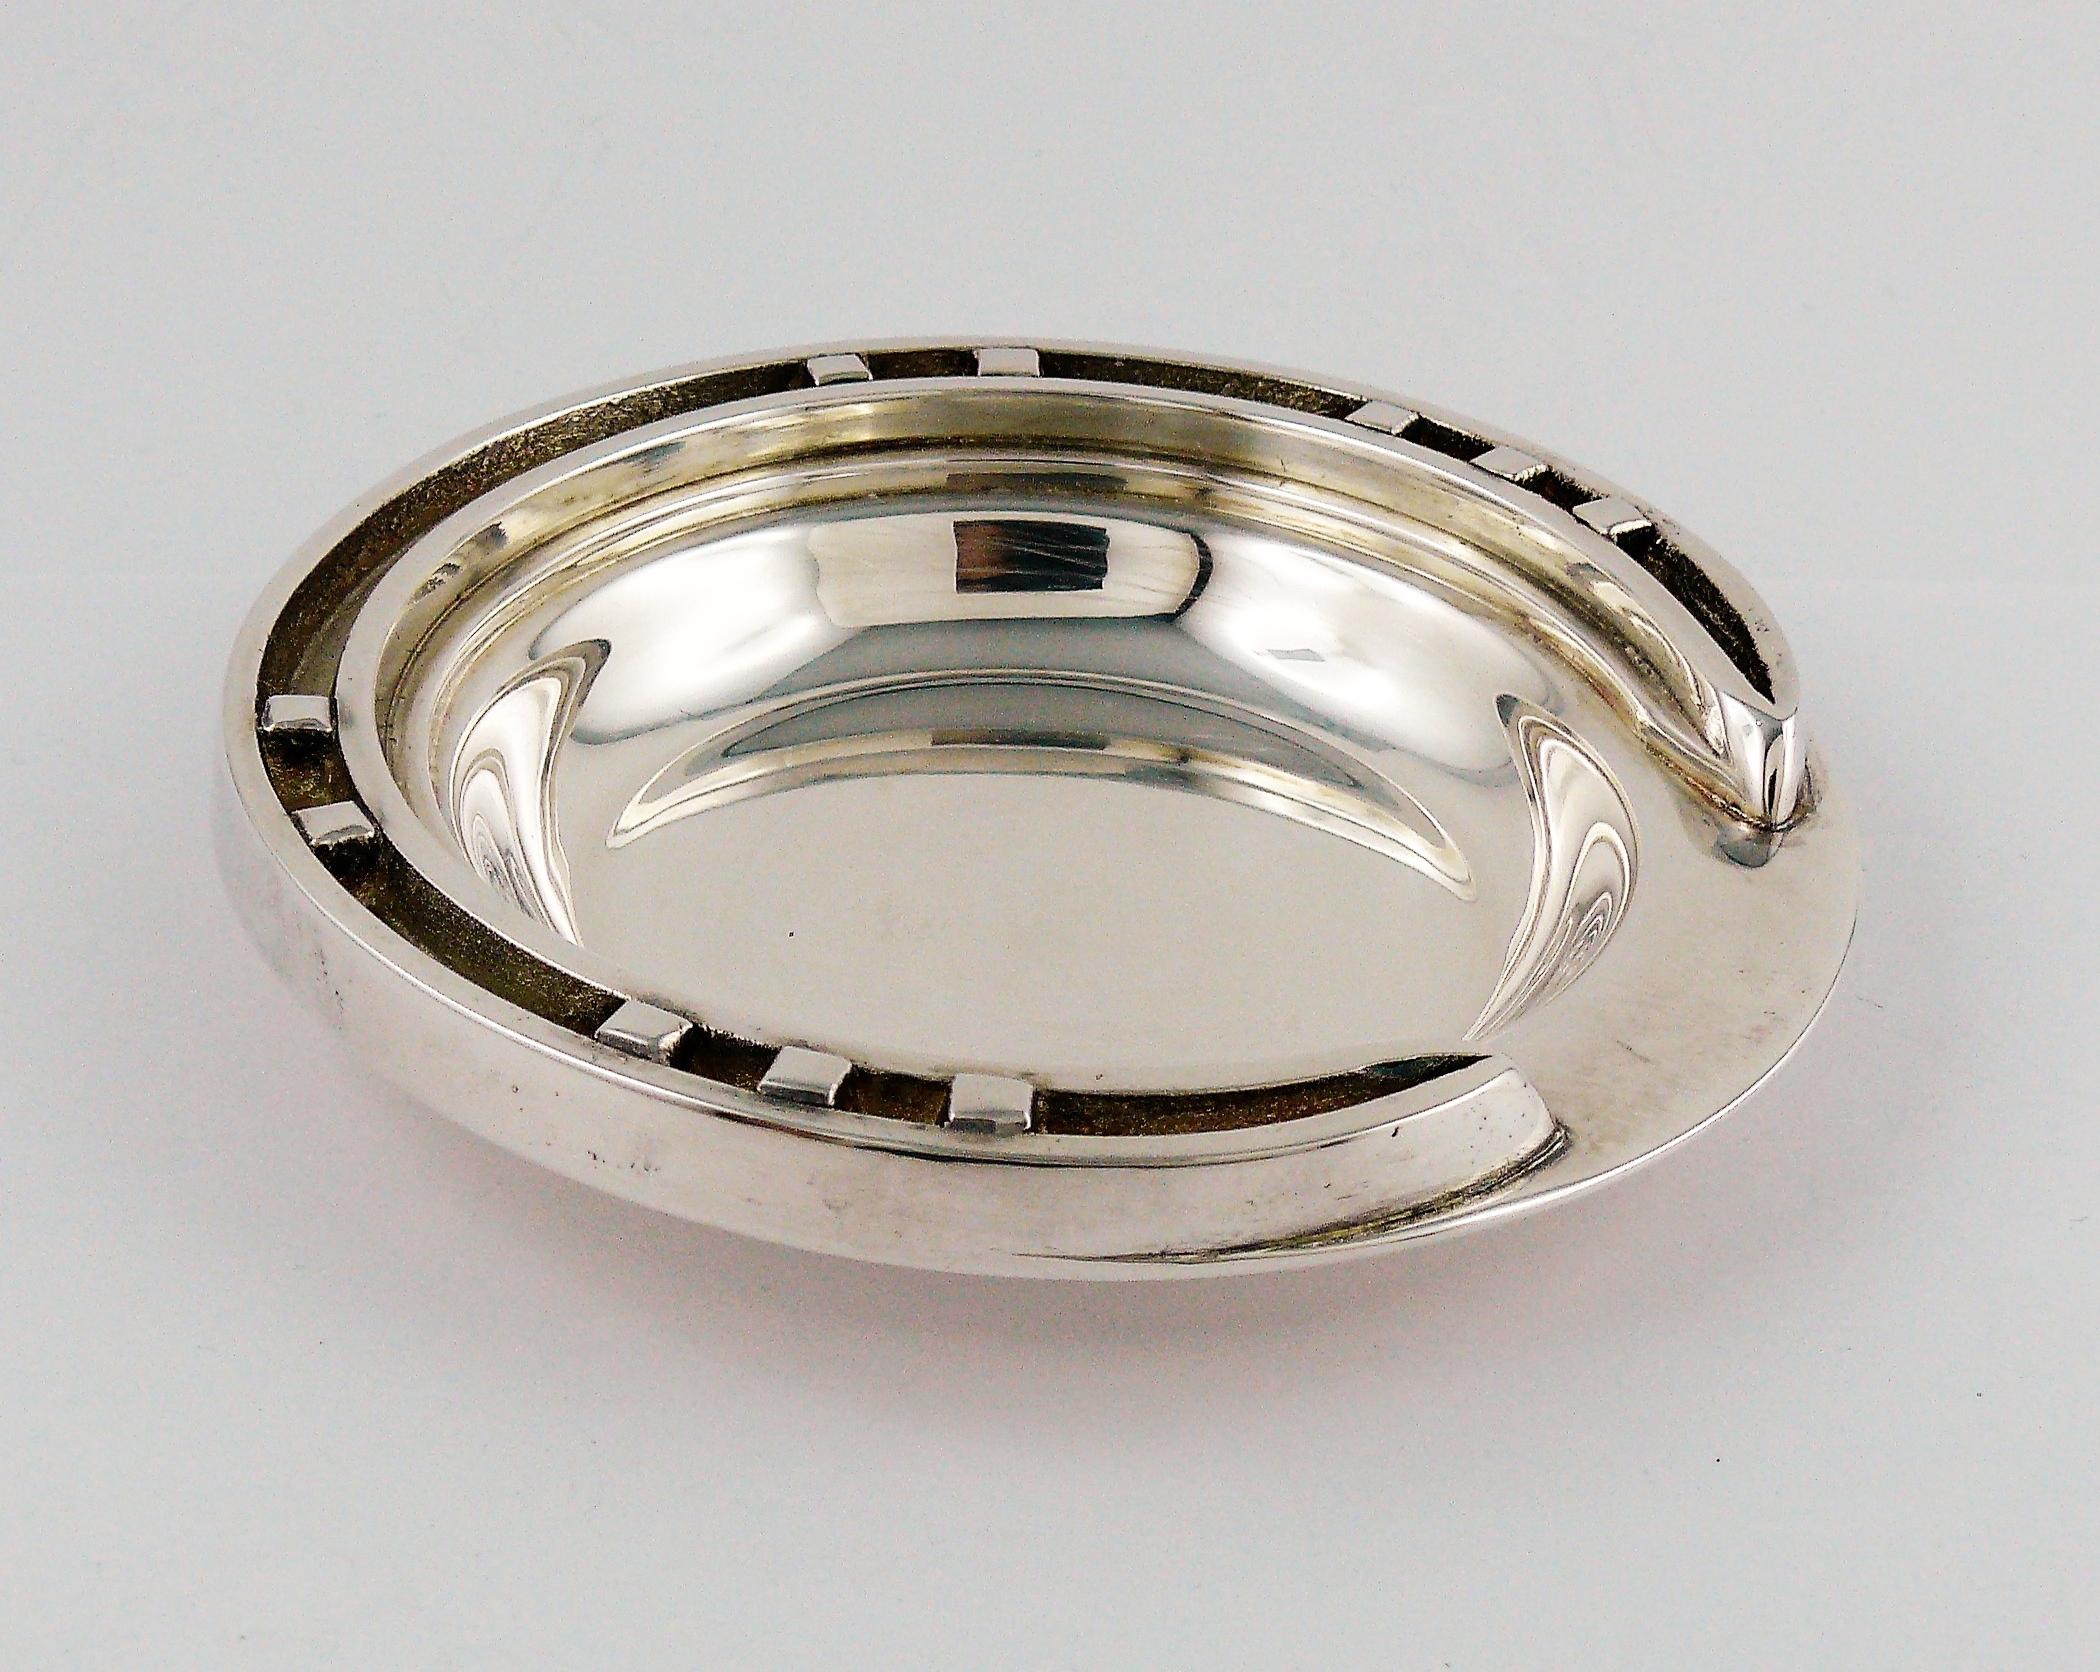 HERMES vintage silver plated horseshoe motif dish.

Marked HERMES Paris.
RAVINET D'ENFERT hallmark.

Indicative measurements : diameter approx. 9 cm (3.54 inches).

CONDITION CHART
- New or never worn : item is in pristine condition with no